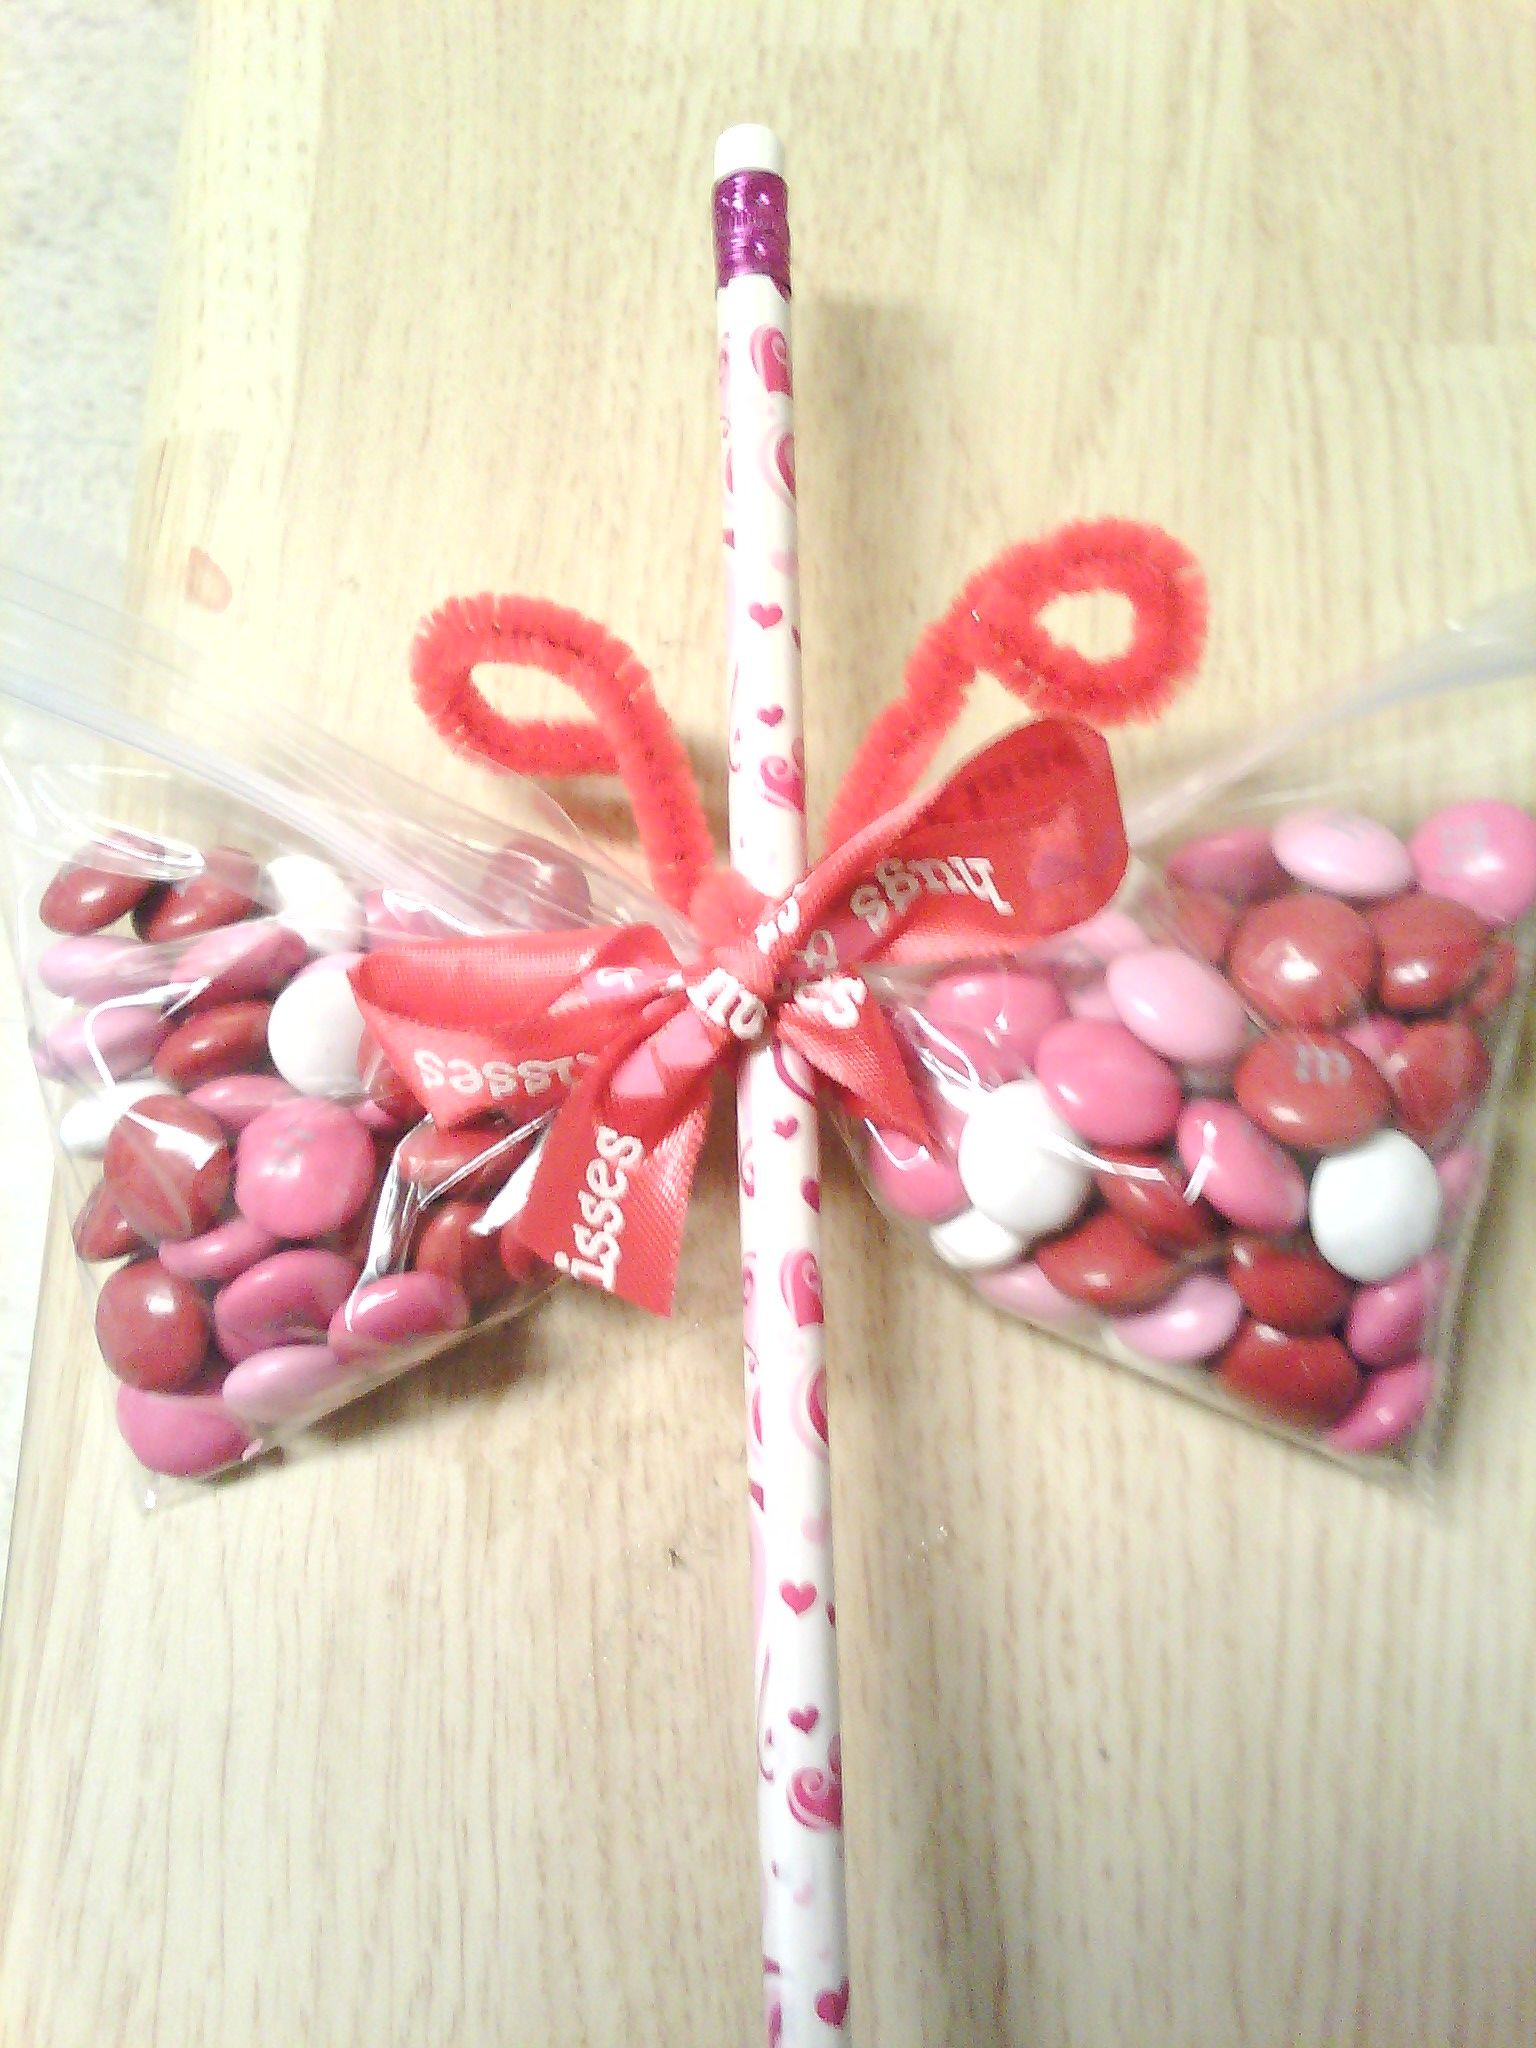 Valentines Day Goodie Bag Ideas
 A butterfly candy snack bag